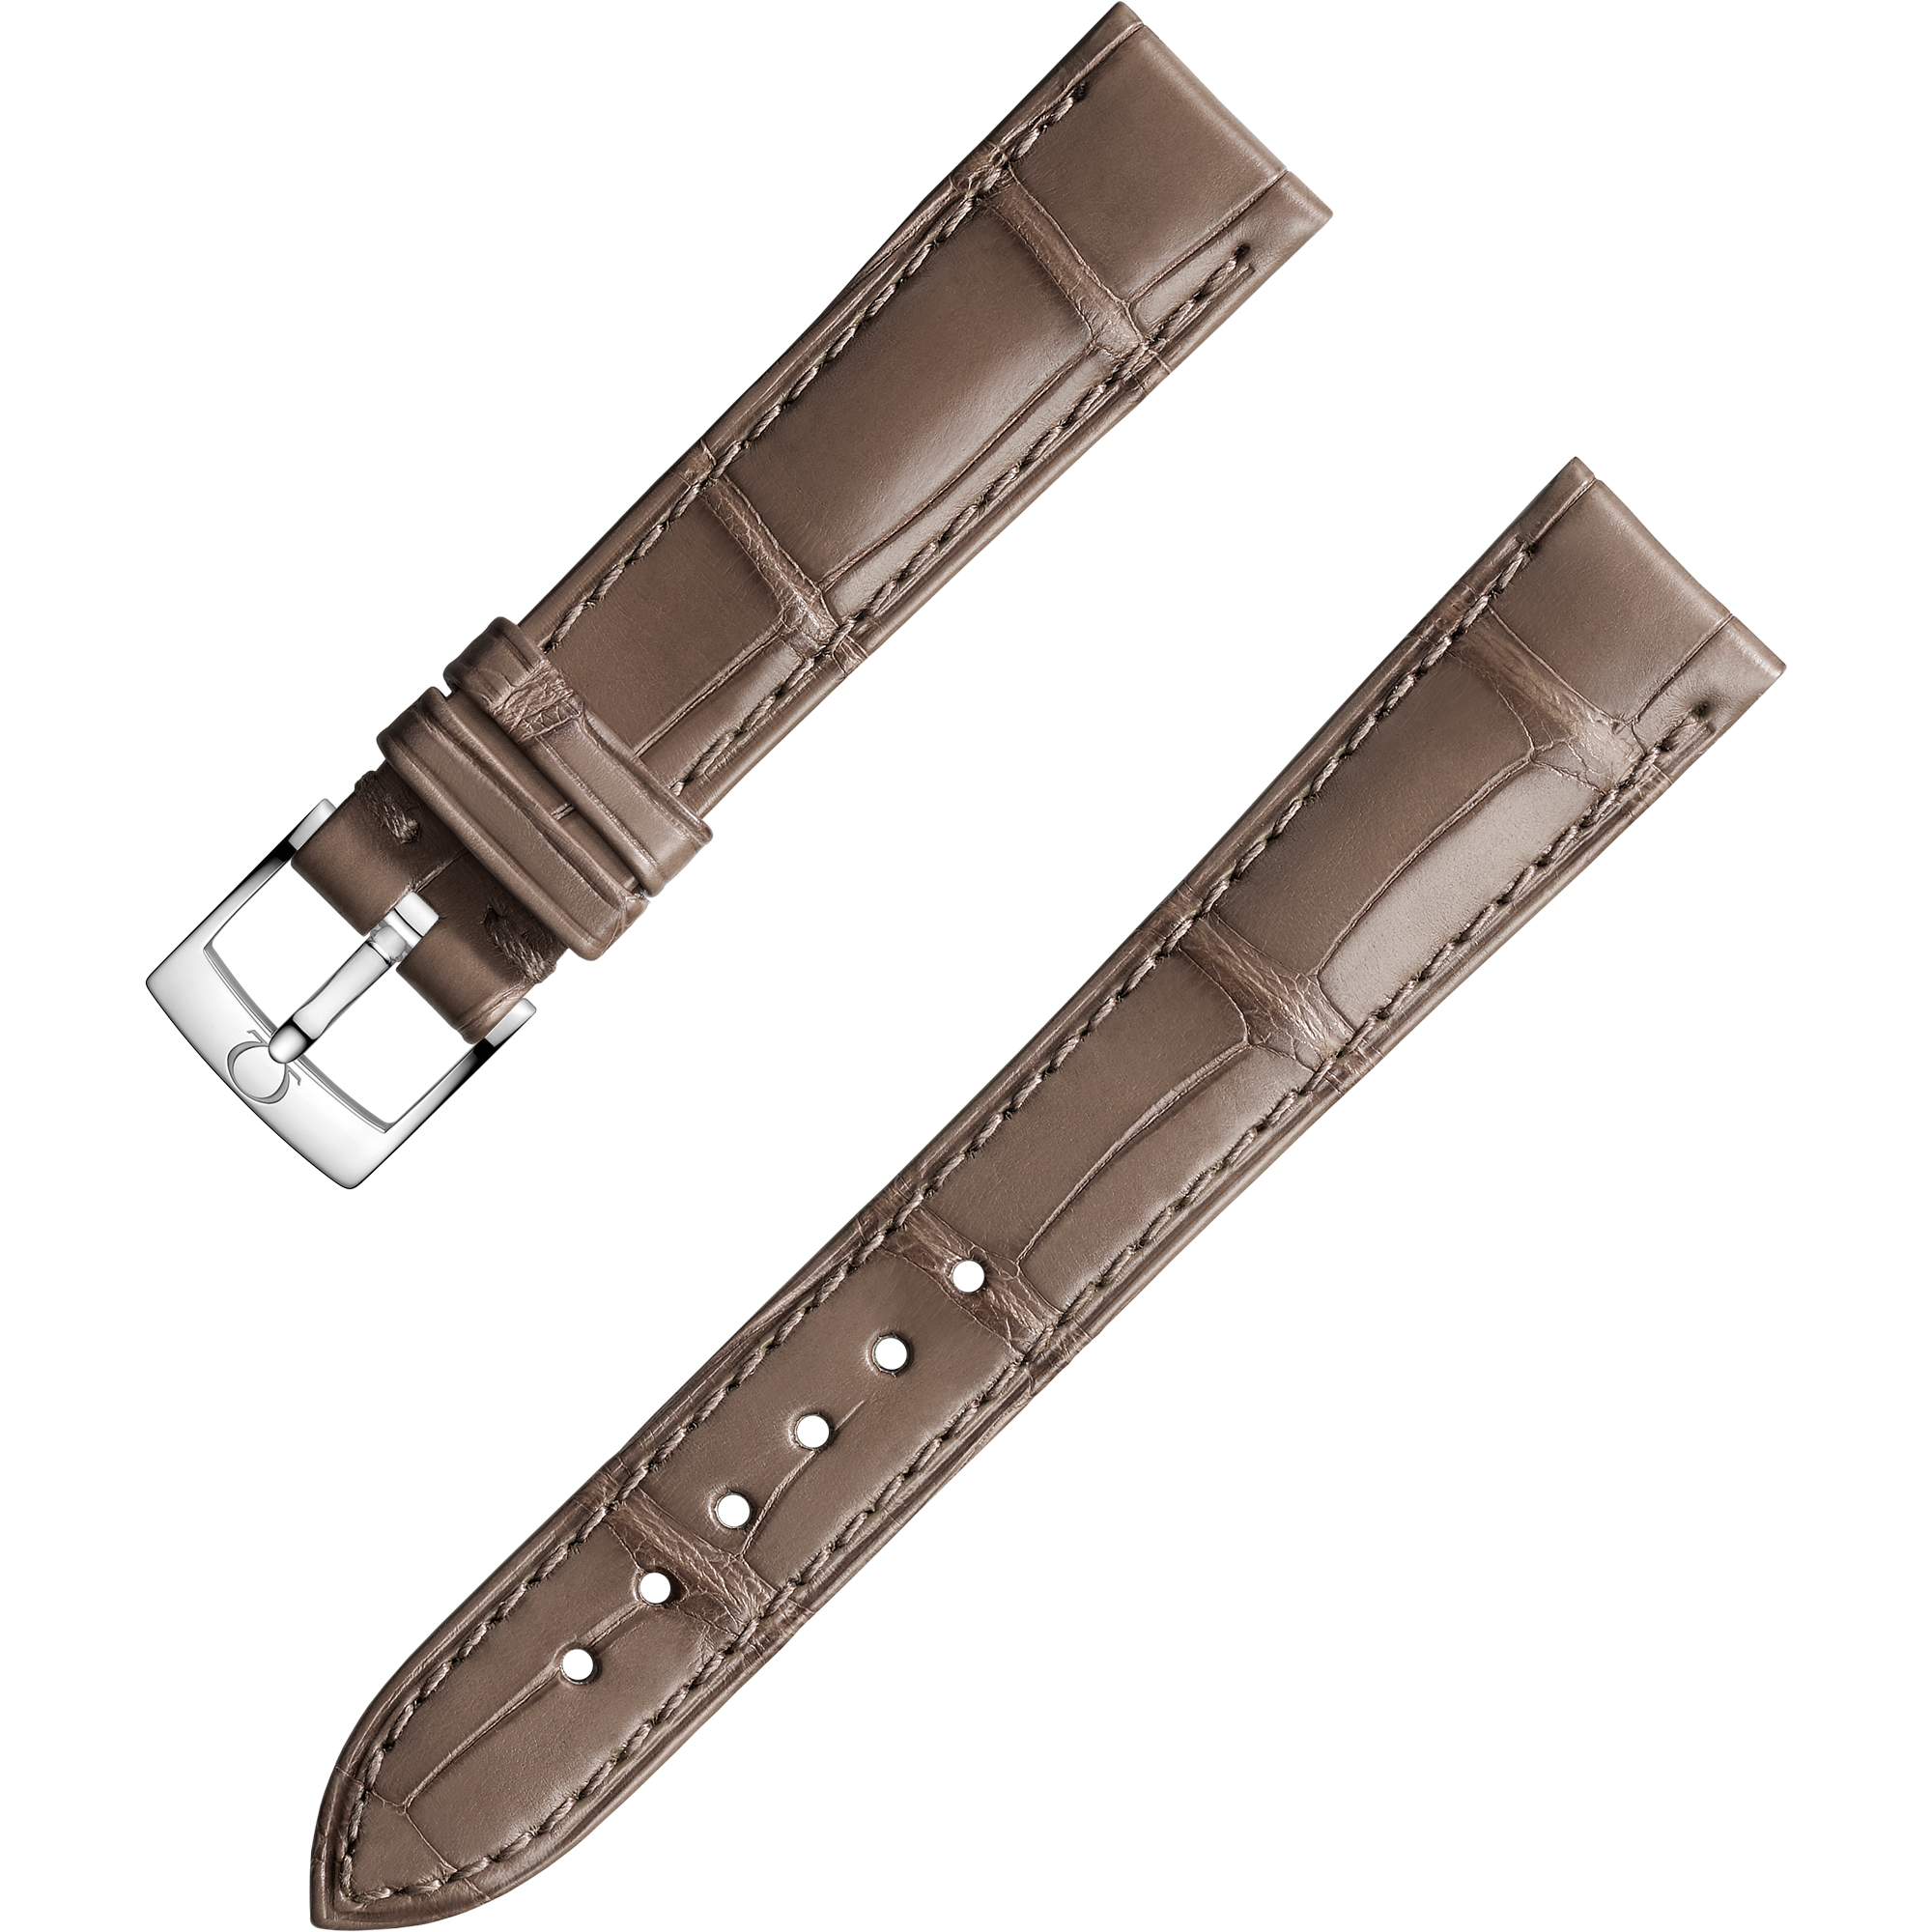 Two-piece strap - Taupe brown alligator leather strap with pin buckle - 032CUZ004834W